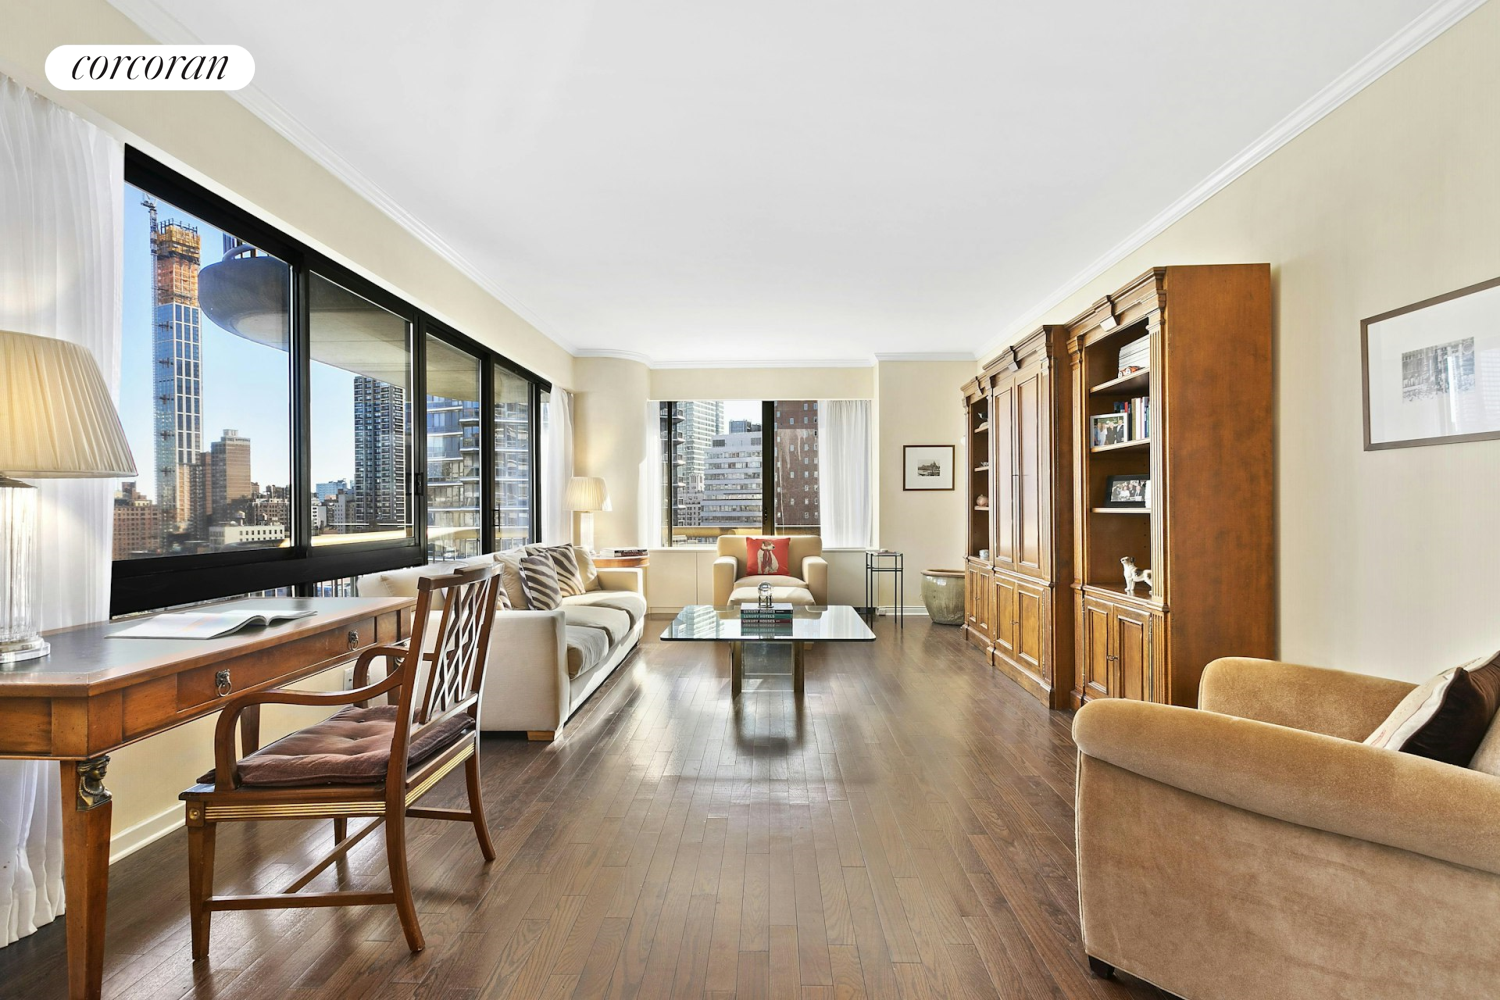 167 East 61st Street 16A, Lenox Hill, Upper East Side, NYC - 2 Bedrooms  
2.5 Bathrooms  
6 Rooms - 